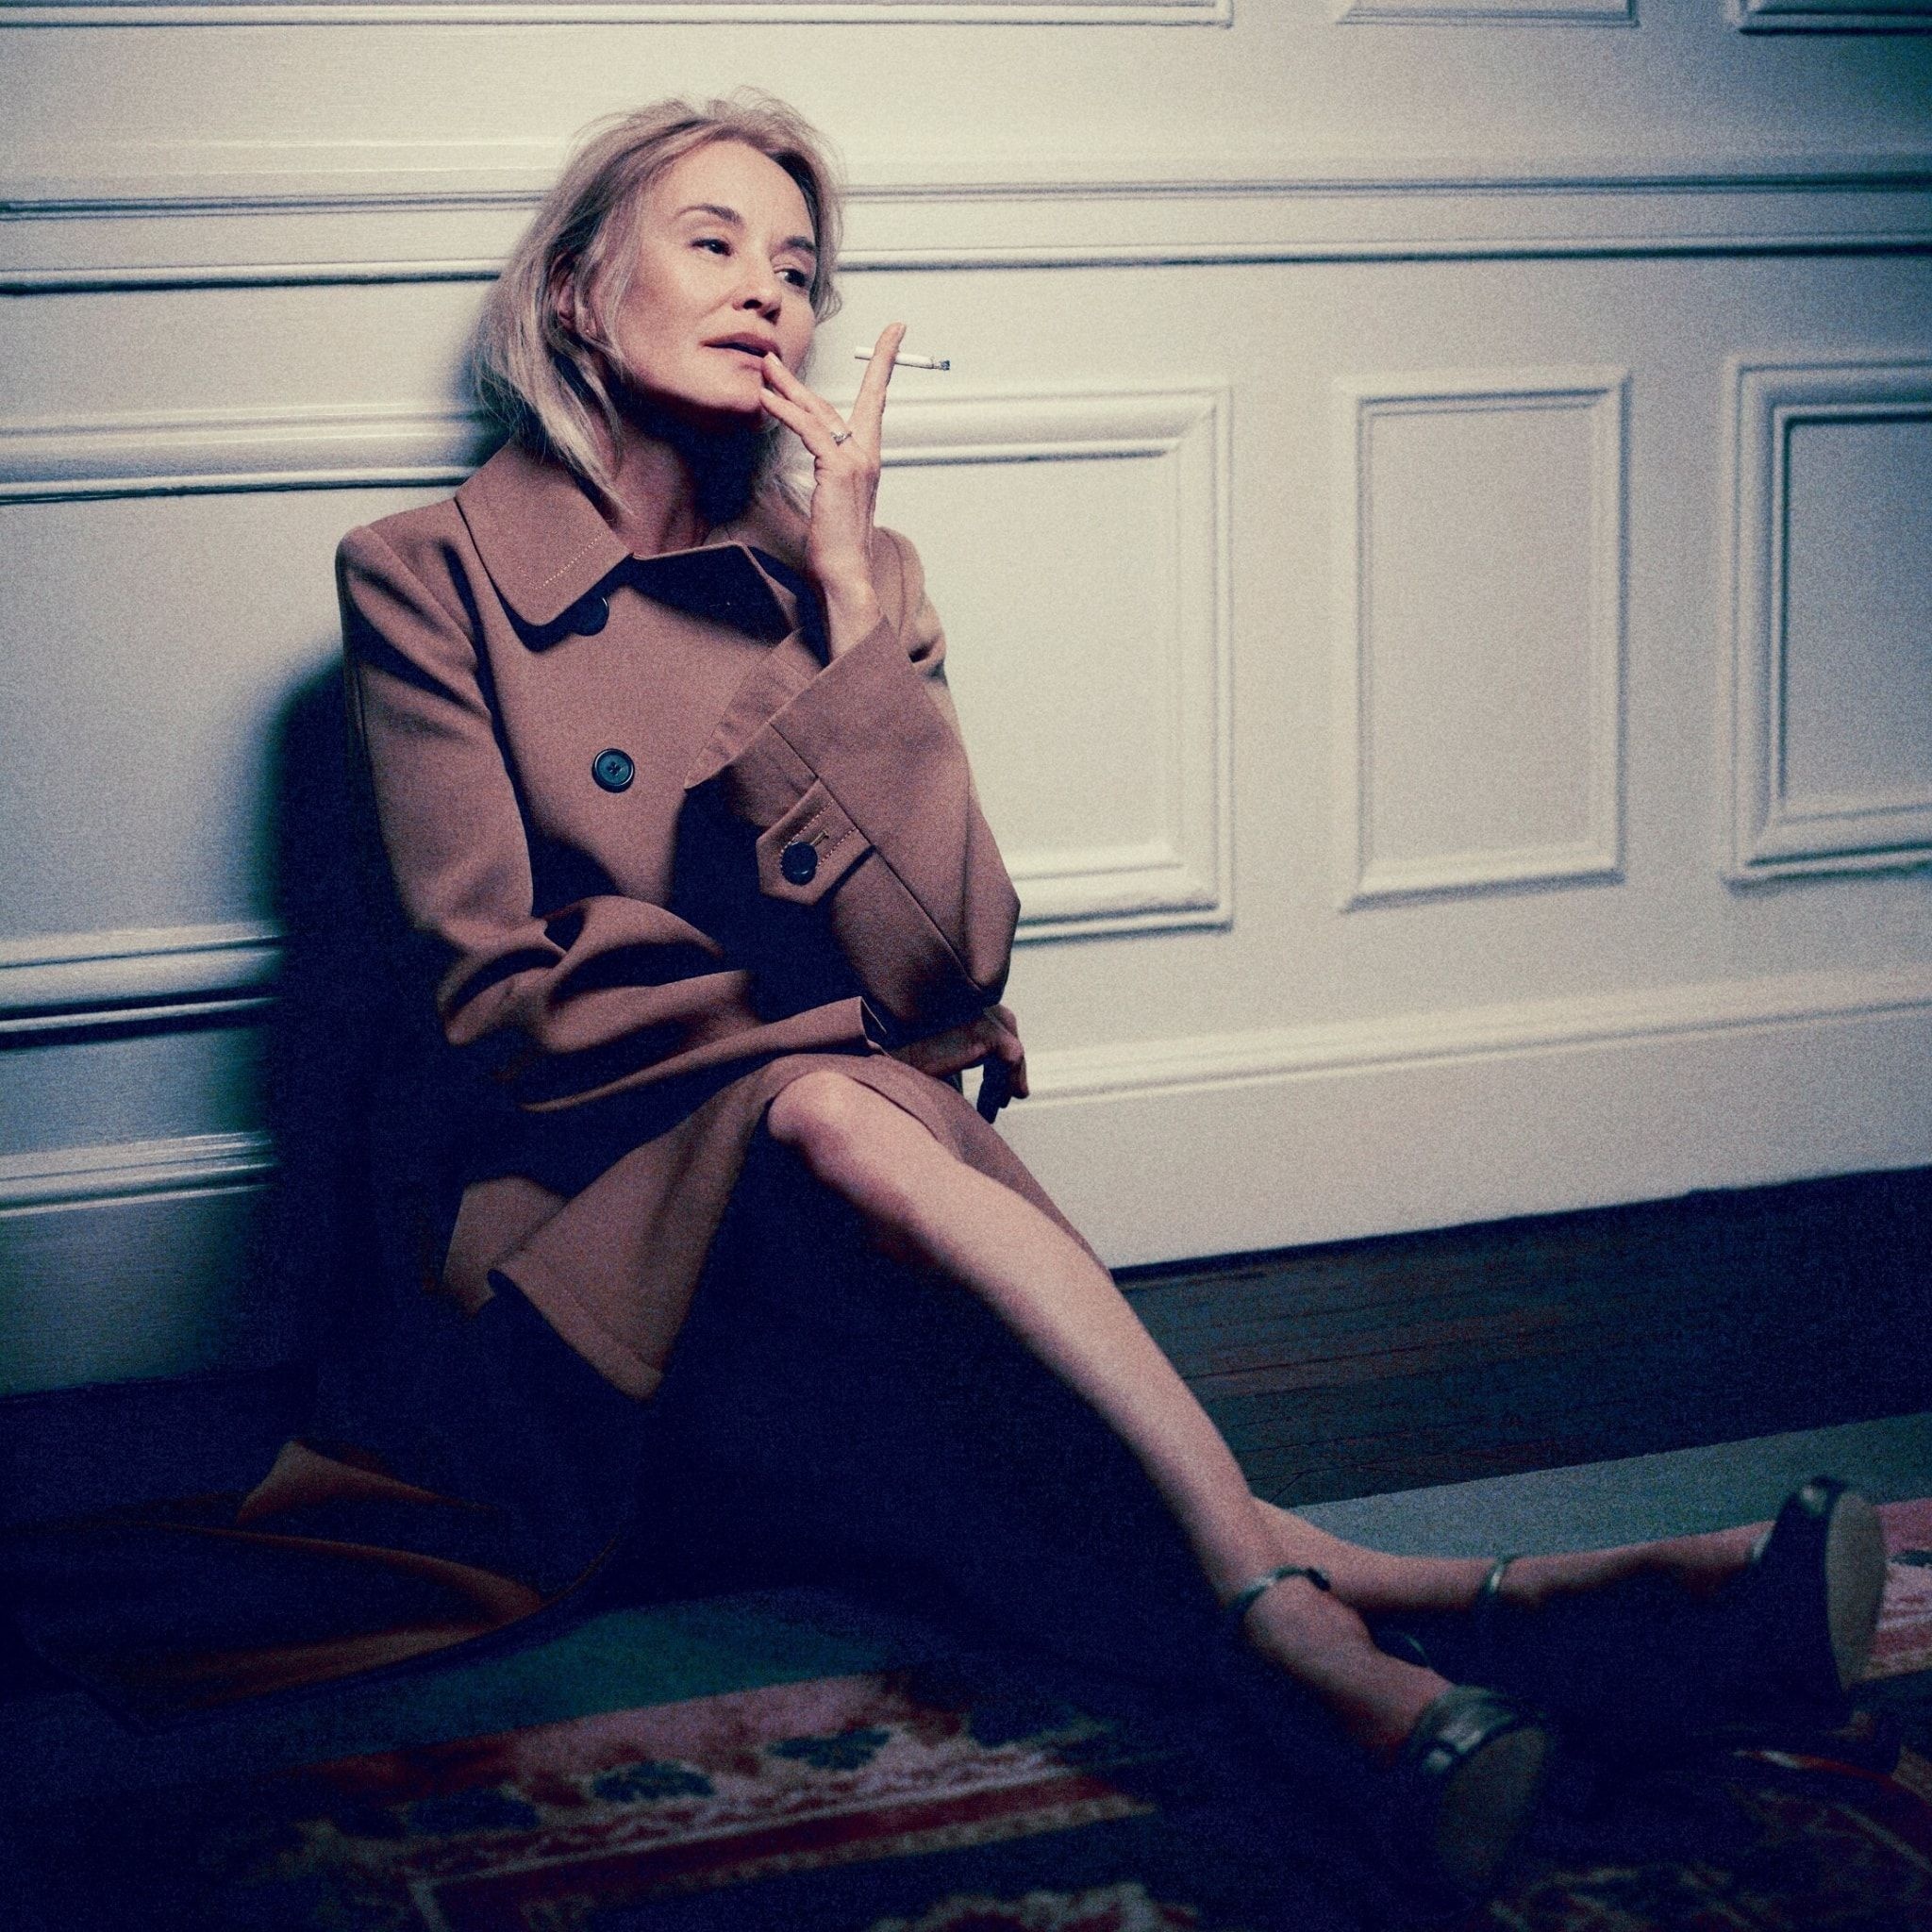 Jessica Lange wallpapers, High-quality images, Celebrity backgrounds, Desktop customization, 2050x2050 HD Handy